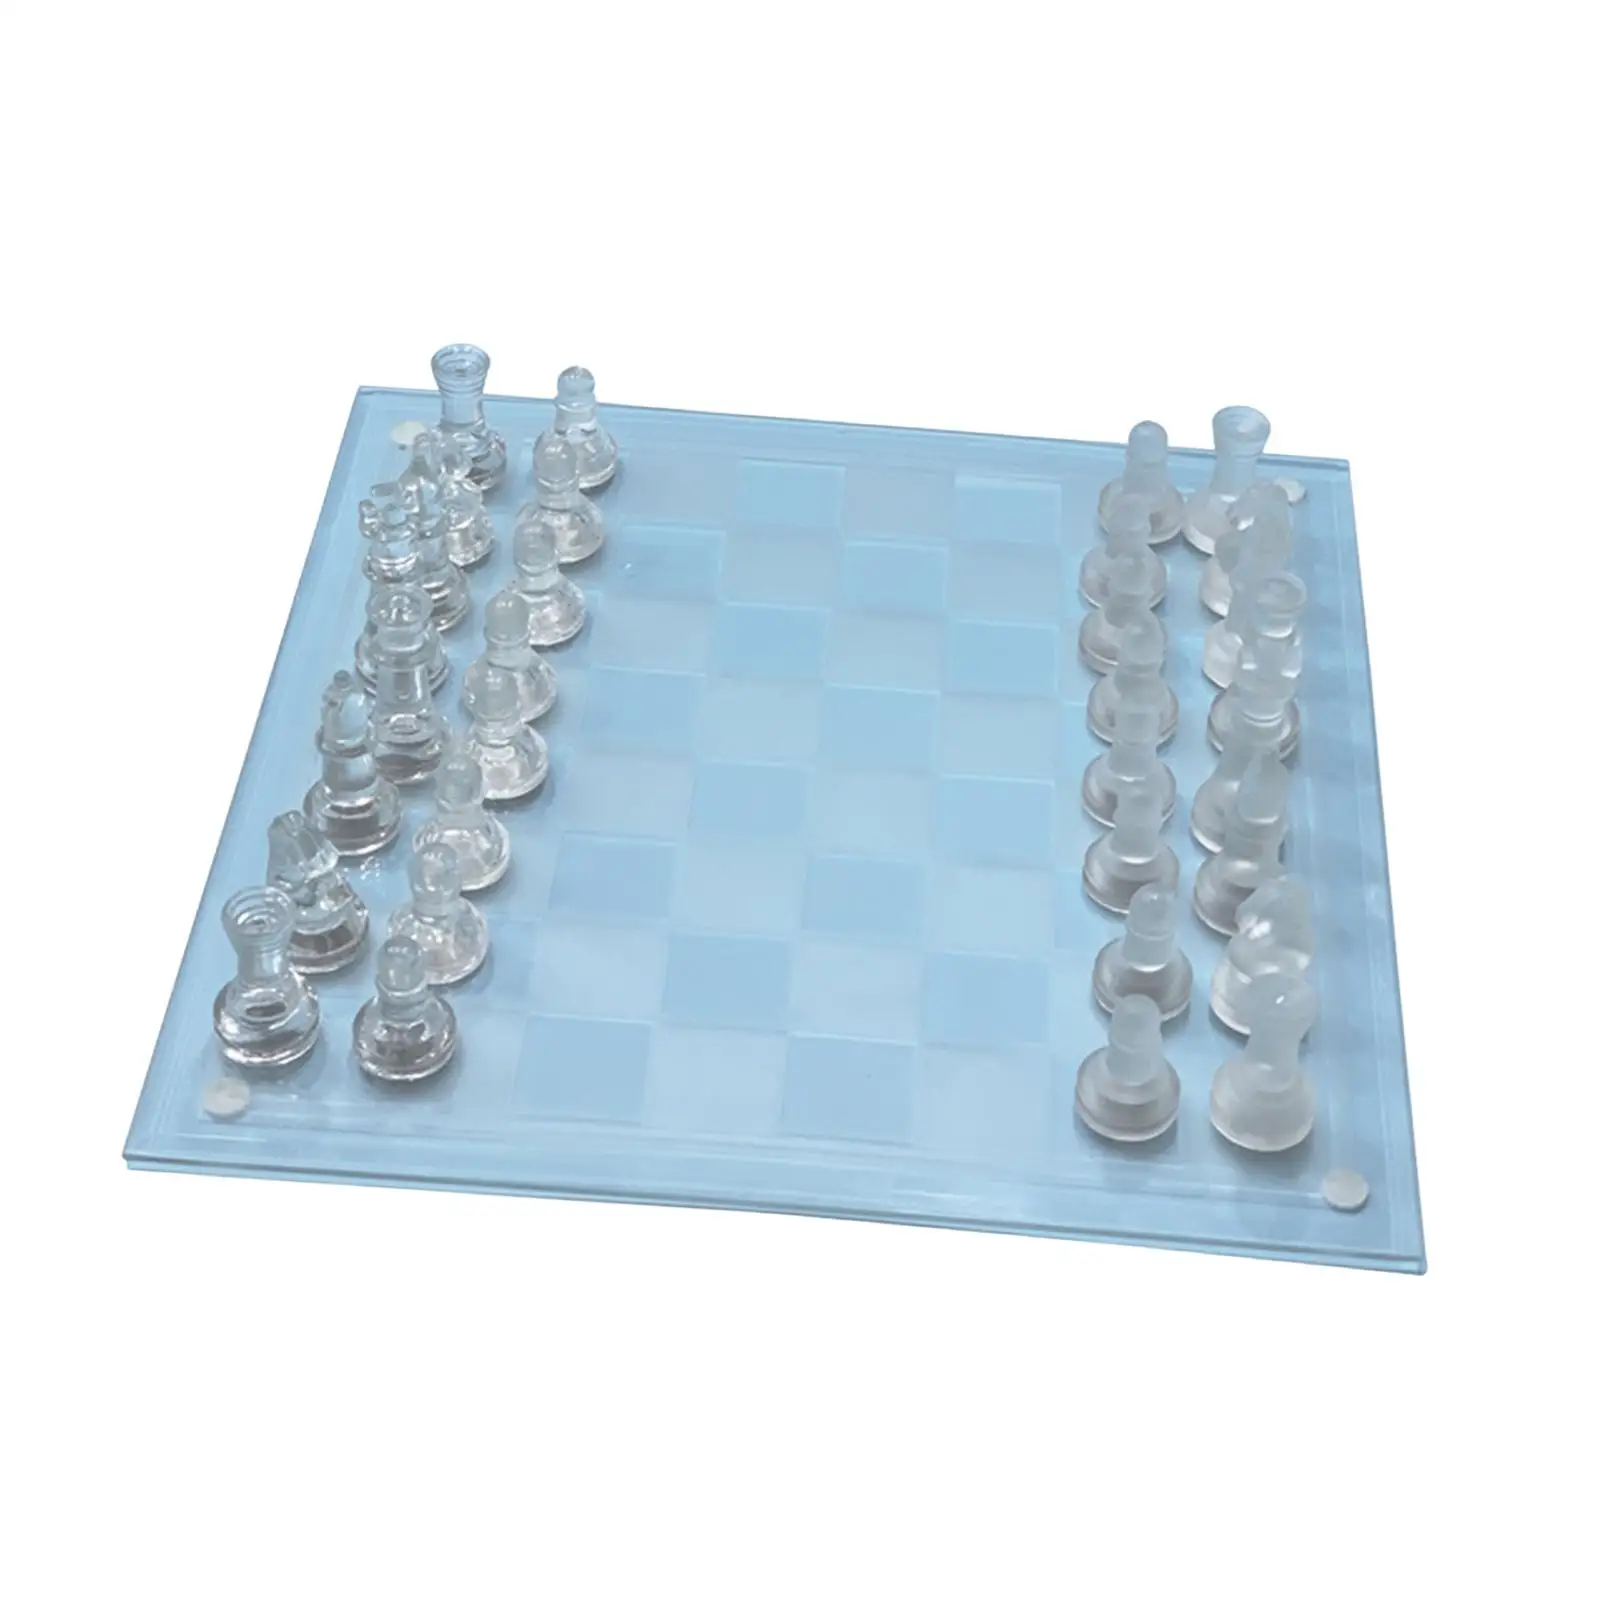 Frosted Chess Set Table Decor Early Education 13.78`x13.78`` Chess Set for Adult for Trips Festival Camping Picnics Activity